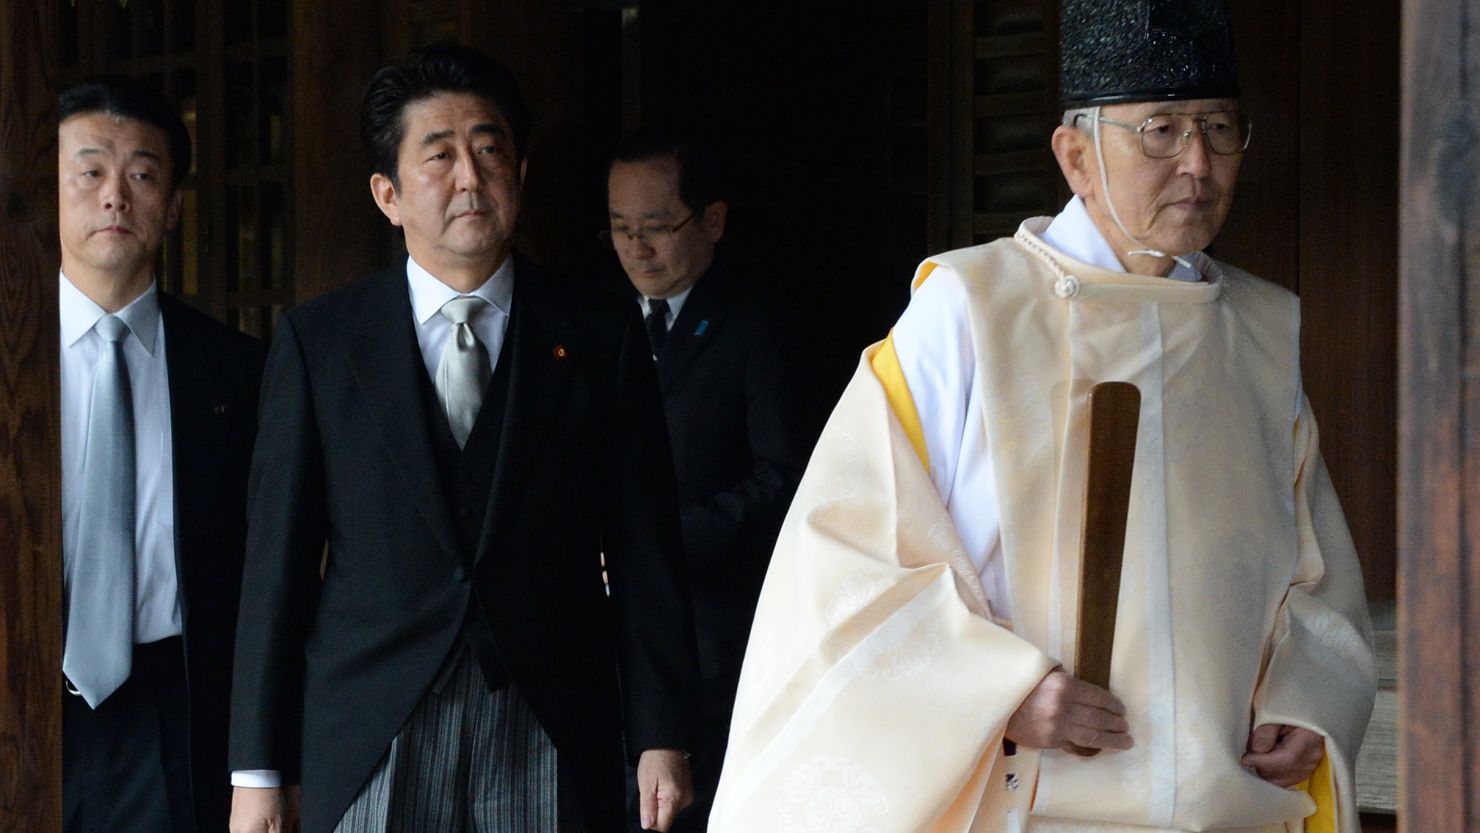 A Shinto priest leads Japan's PM Shinzo Abe during a controversial visit to the Yasukuni war shrine in Tokyo in December 2013.